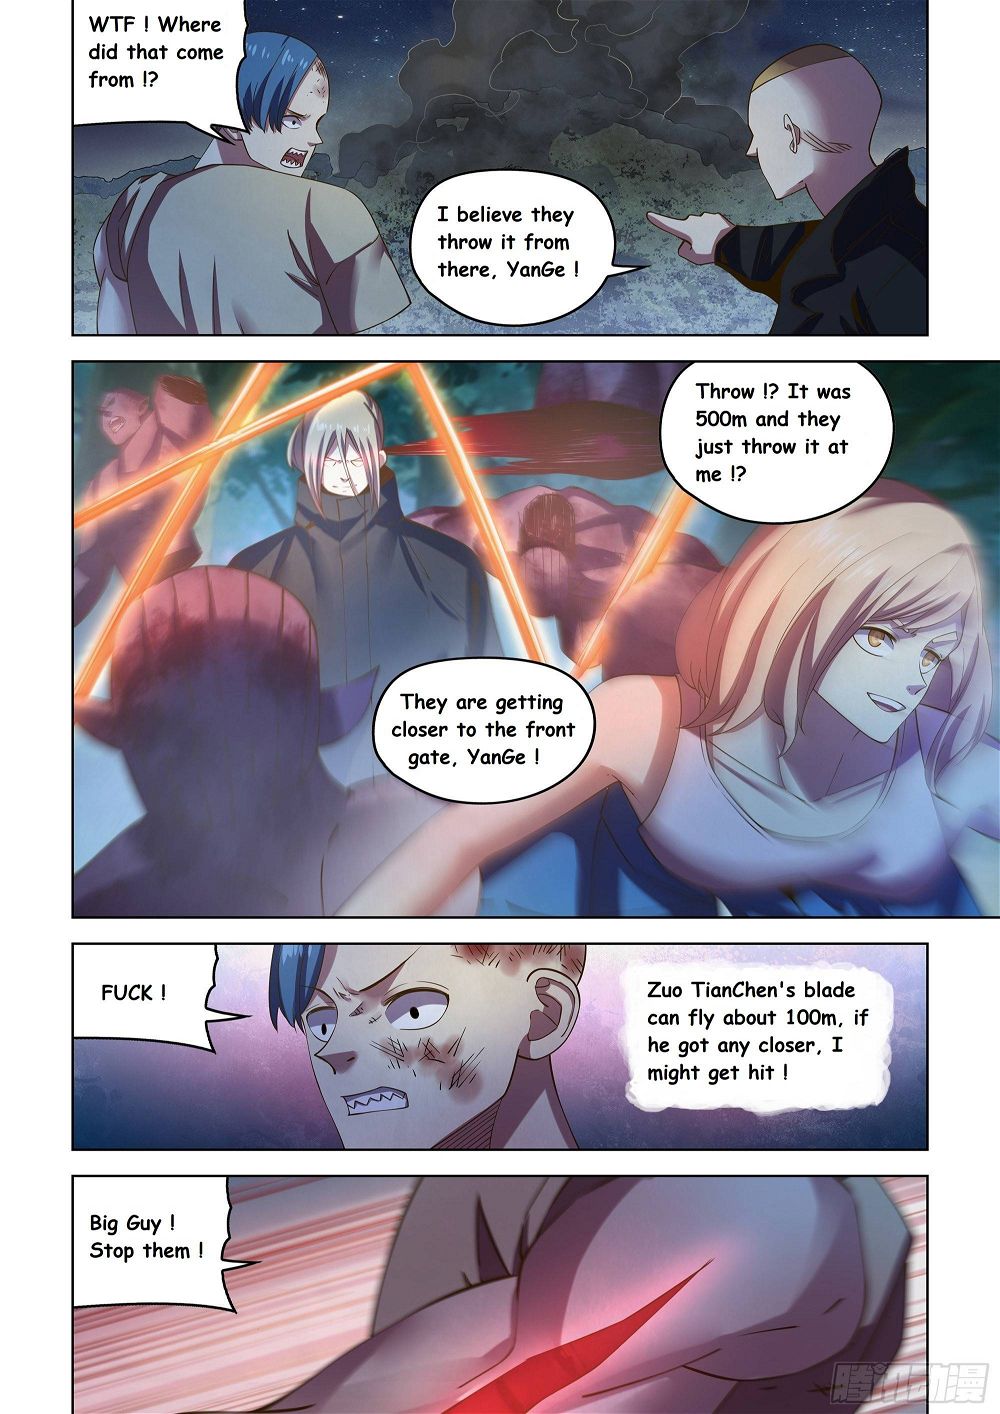 The Last Human Chapter 477 - Page 5